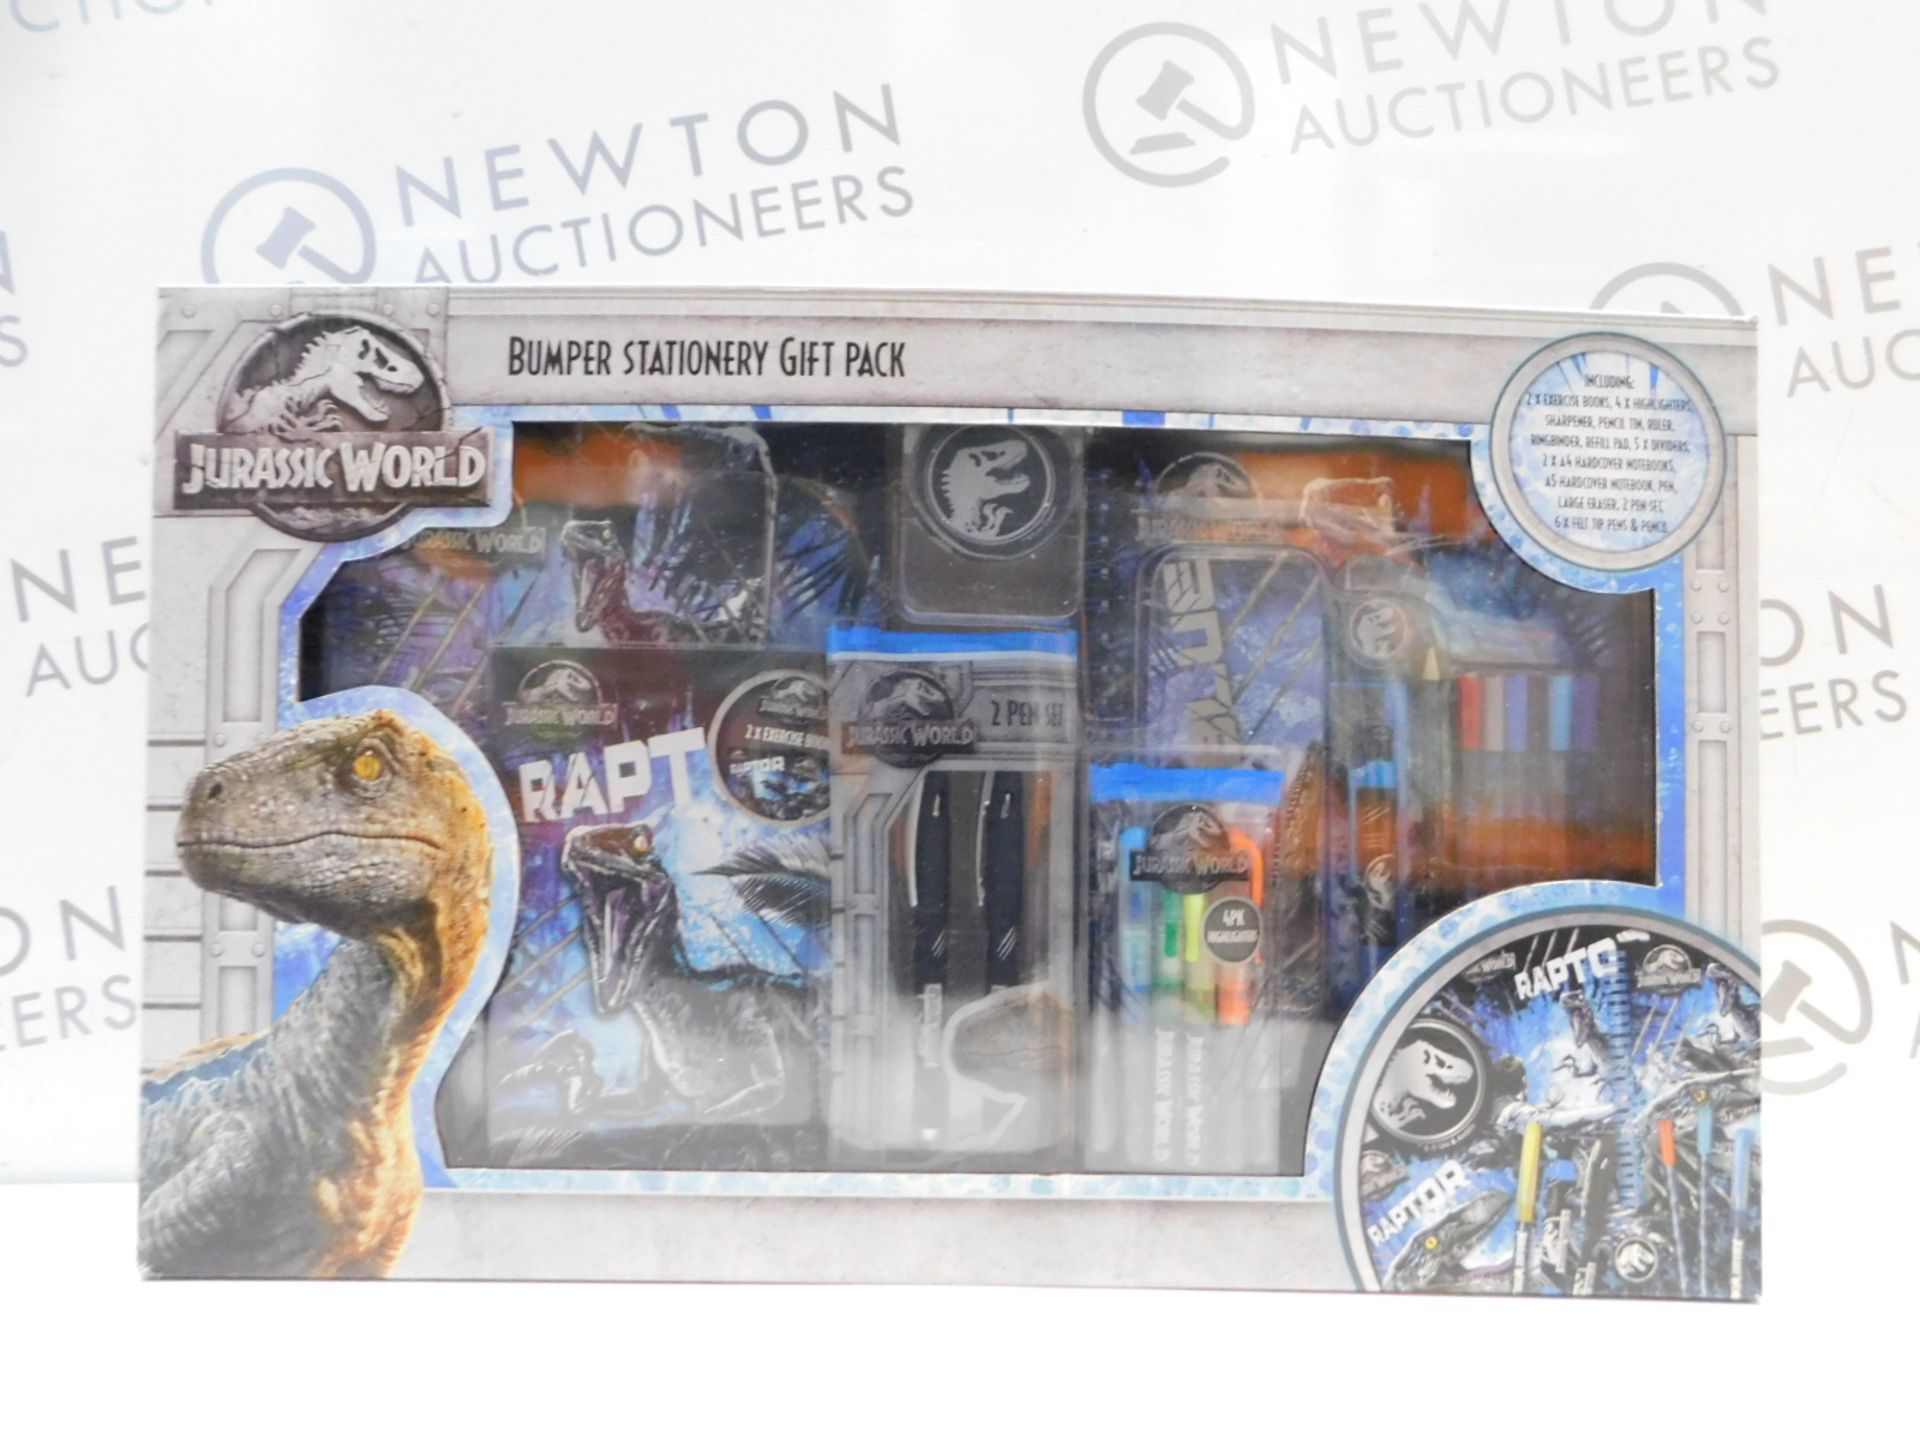 1 BRAND NEW BOXED JURASSIC WORLD BUMPER STATIONERY GIFT PACK RRP Â£29.99